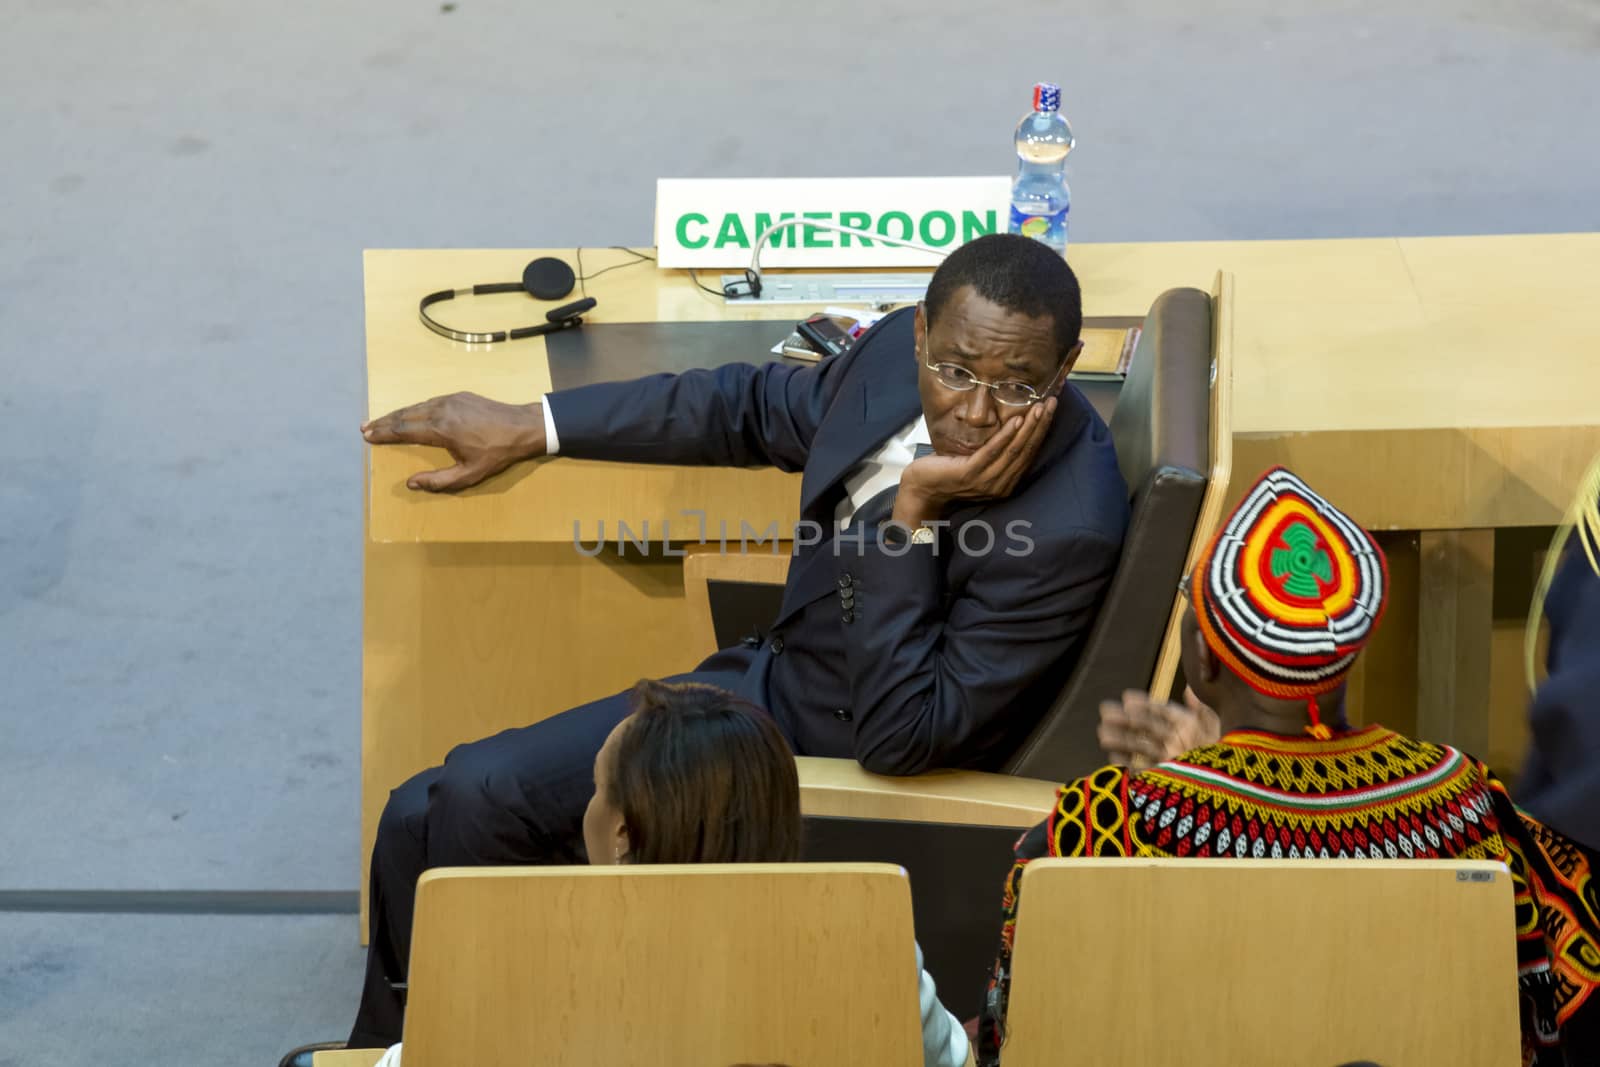 Addis Ababa - July 28: High level delegate of Cameroon awaits the arrival of President Obama on July 28, 2015, at the AU Conference Centre in Addis Ababa, Ethiopia.